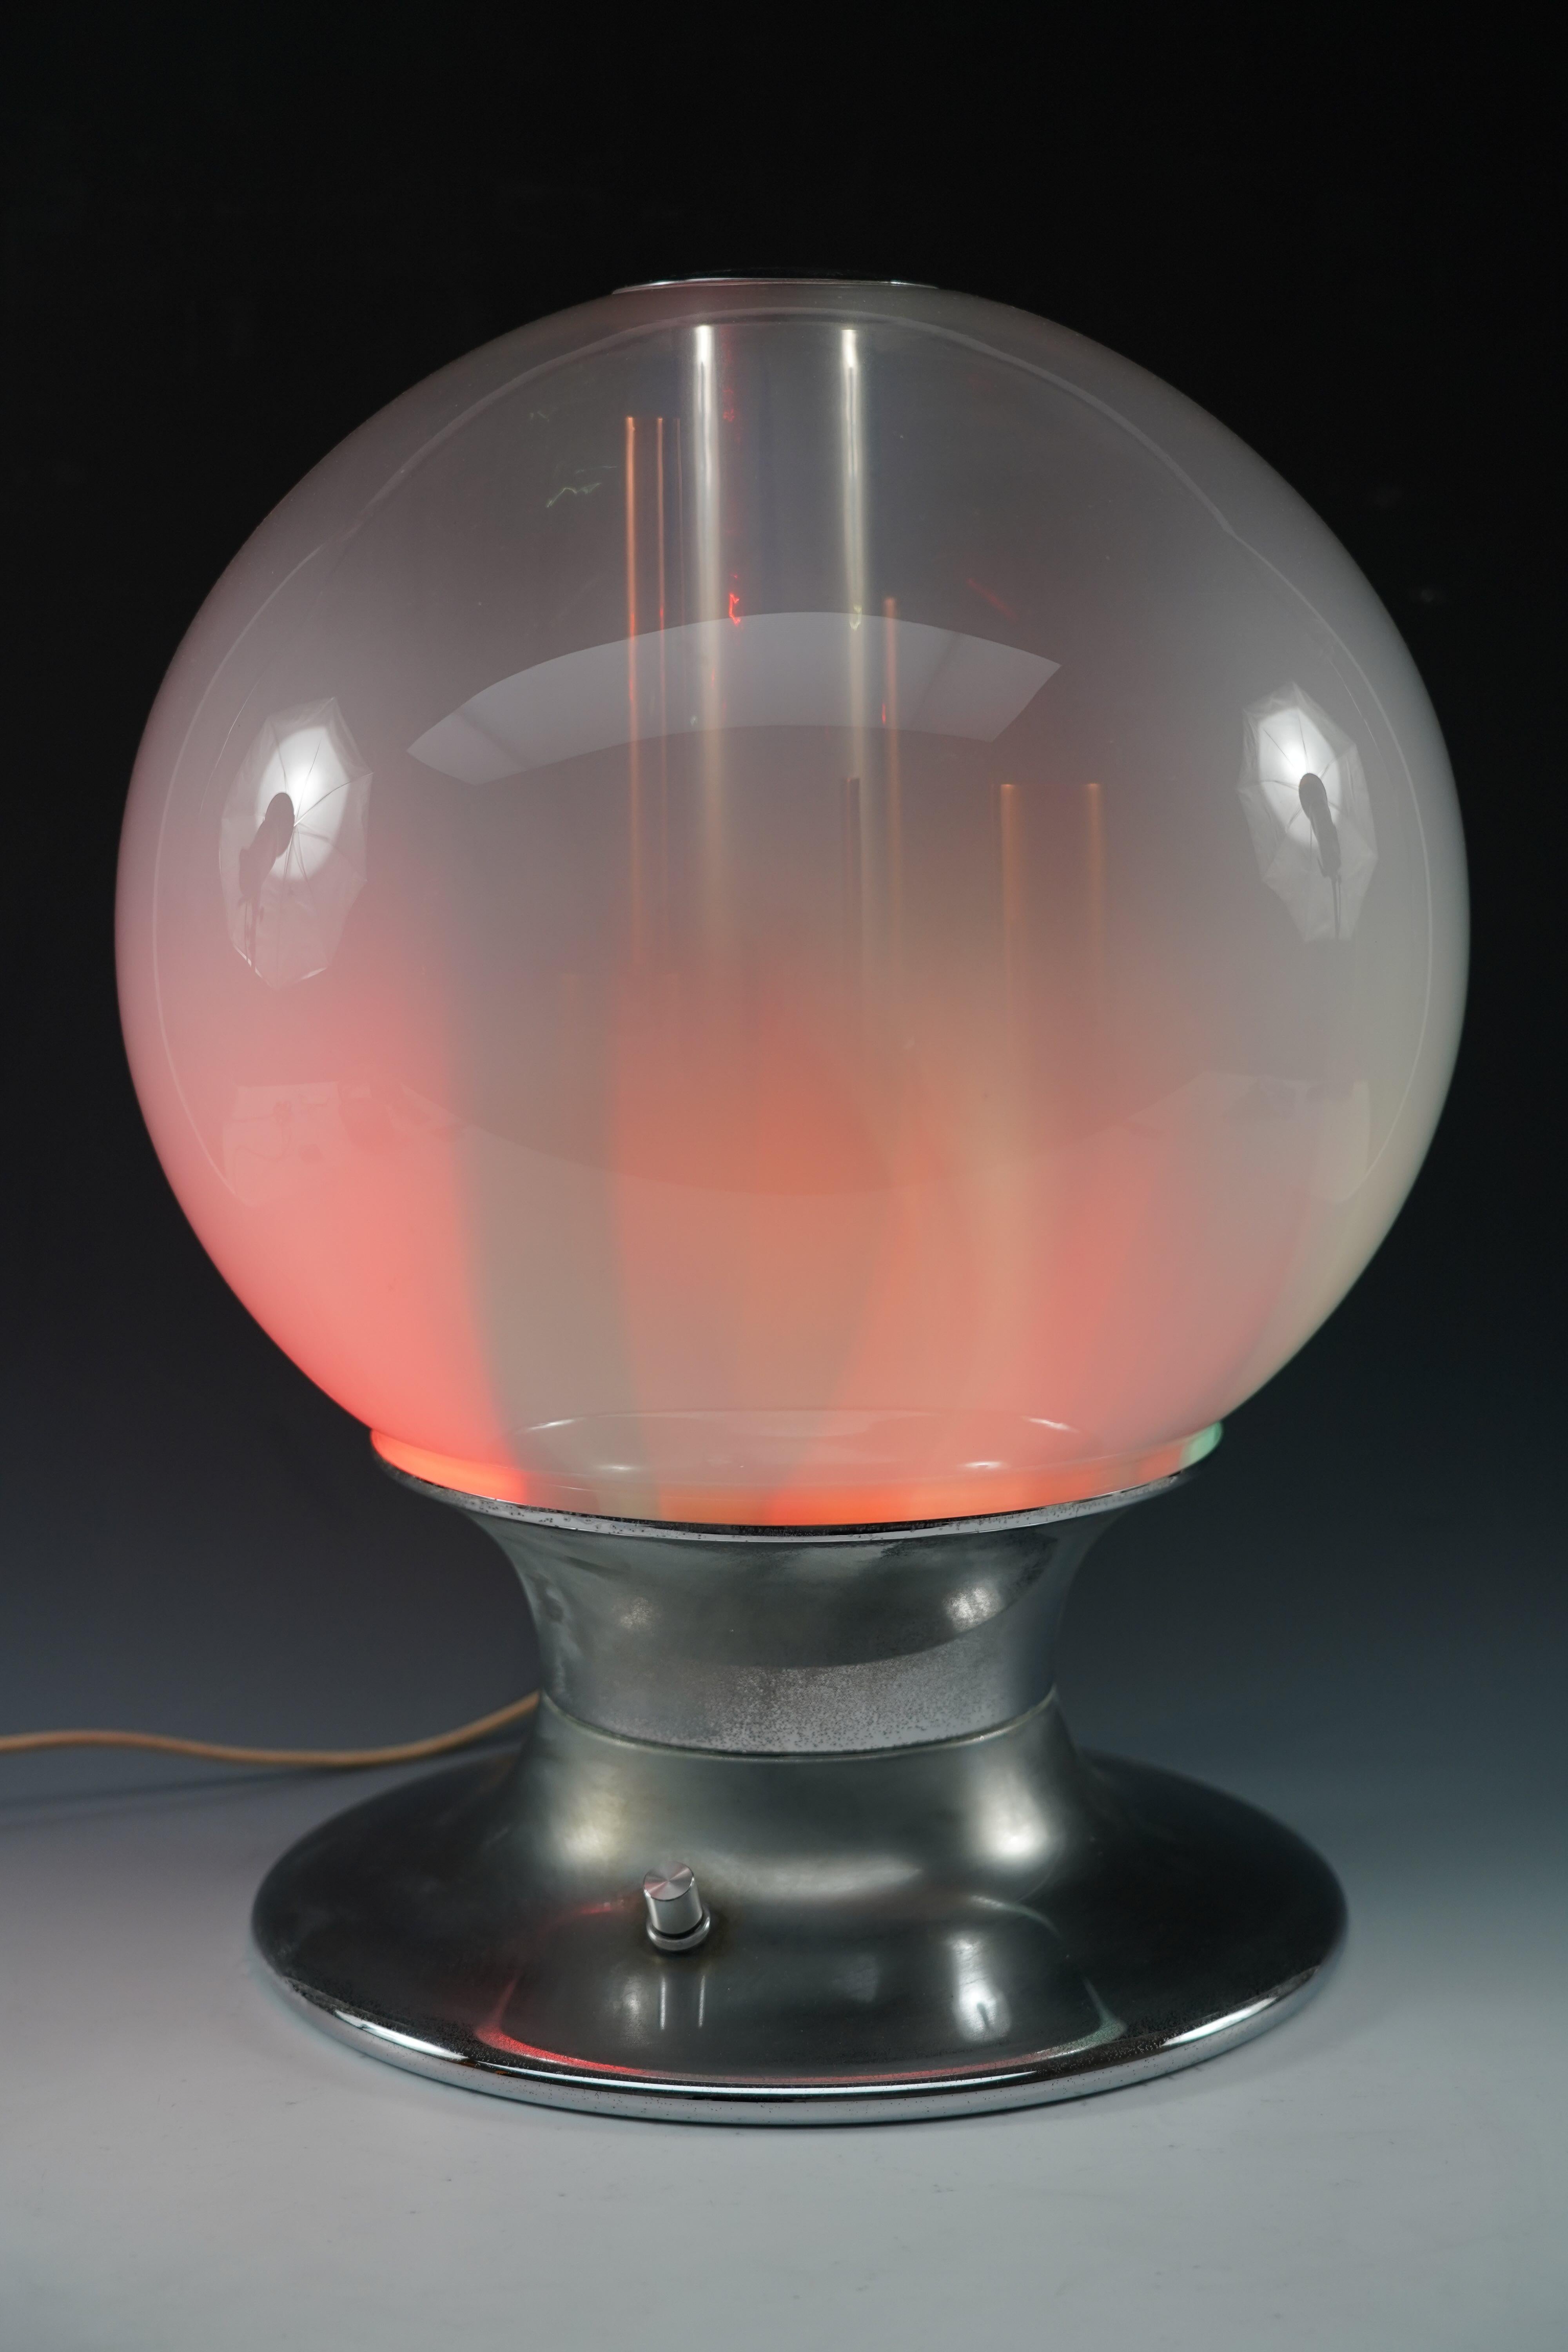 Superb table lamp composed of a blown Murano glass globe and a chromed metal base, from the 1970s, and produced by “Selenova”.
It is made up of 4 bulbs, green, red, yellow and white which diffuse lighting of variable intensity via a dimmer.
This